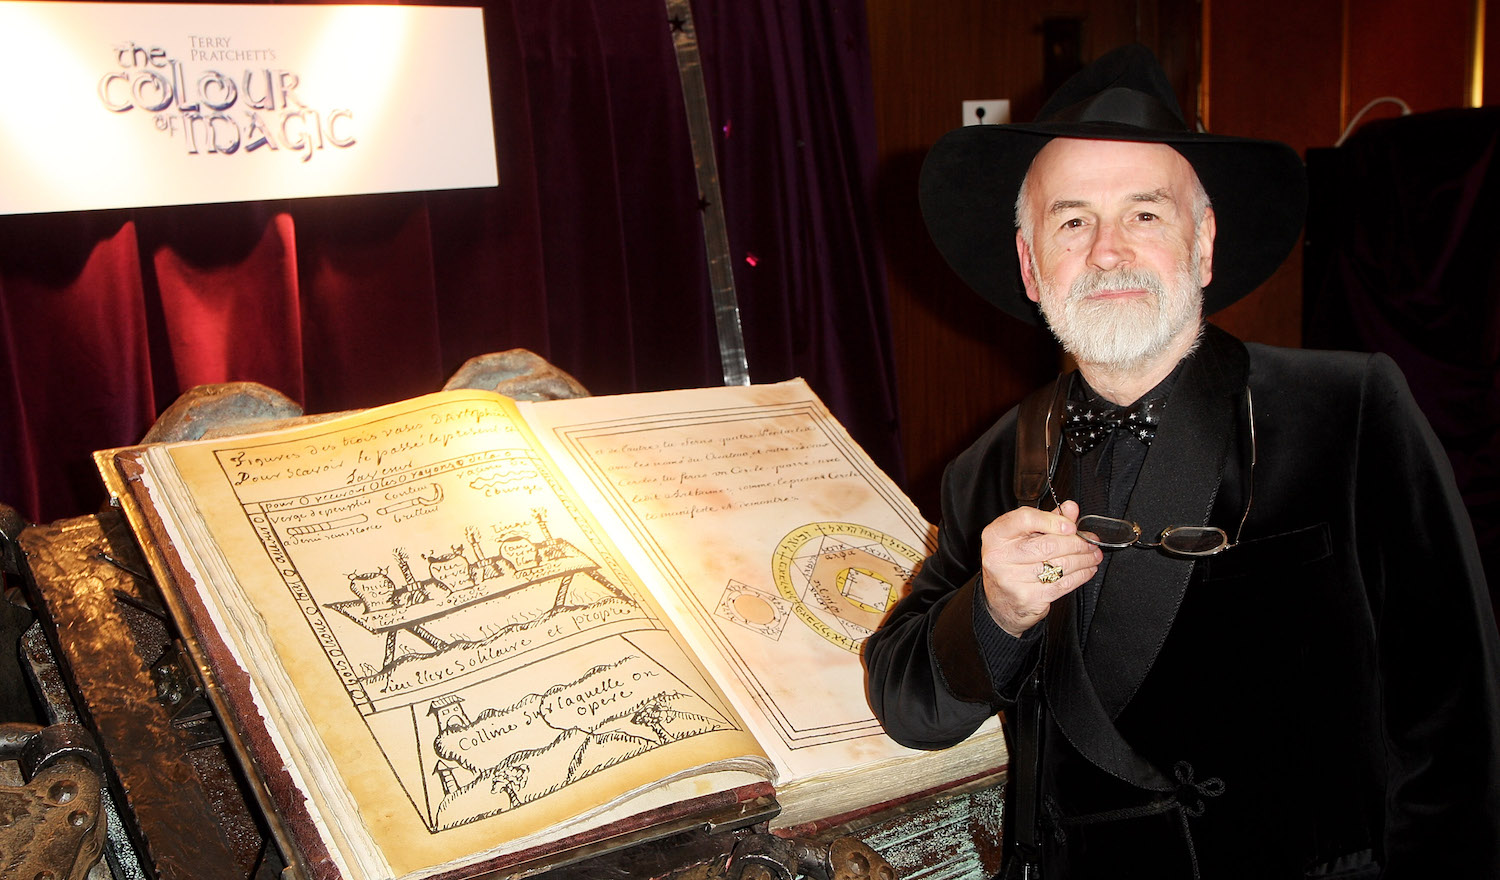 The Unmade Terry Pratchett Movies (and Why They Didn't Happen)